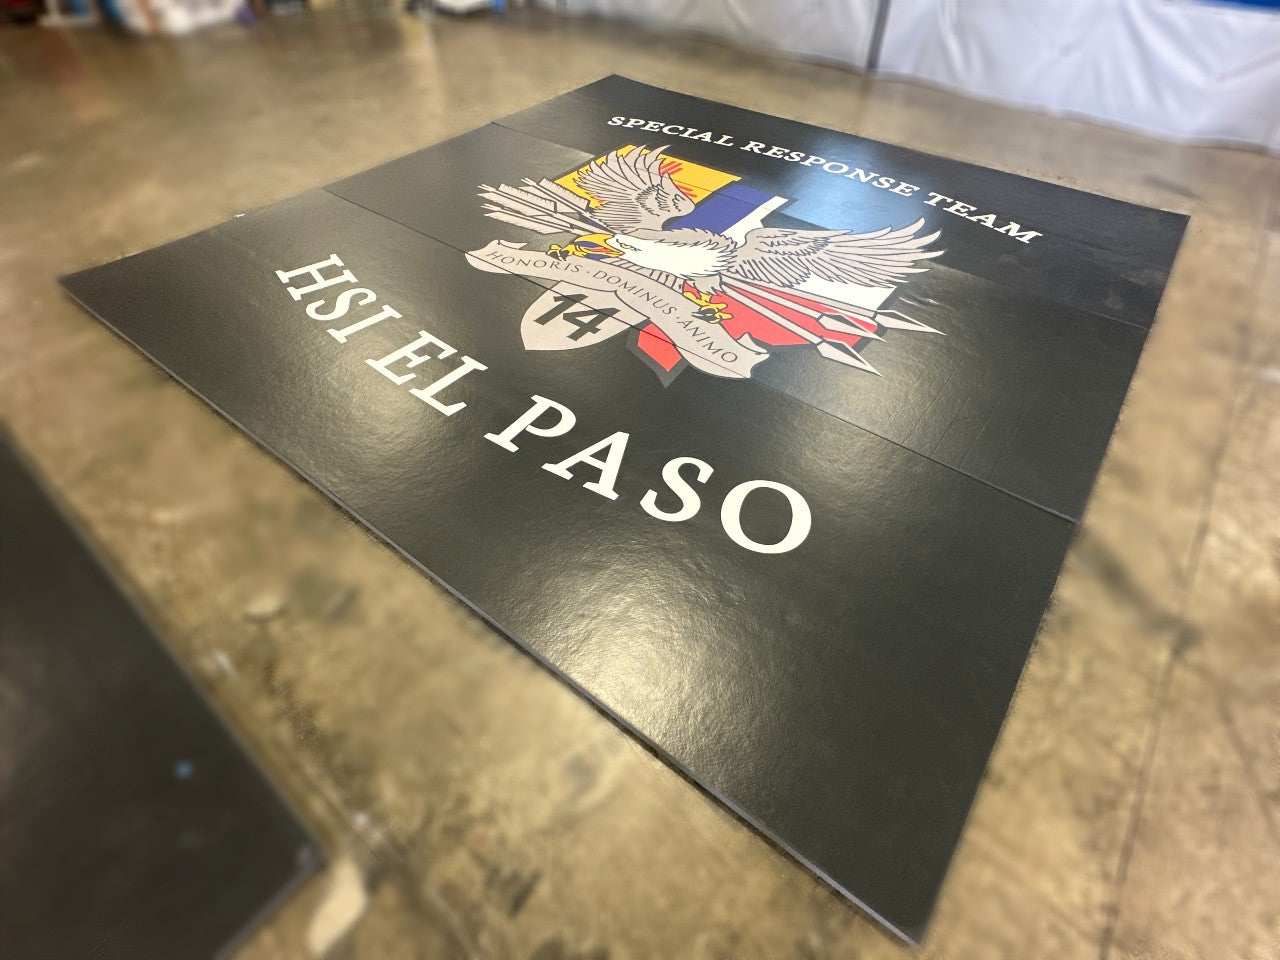 CLEARANCE 14' x 14' x 1 3/8" Roll Up Wrestling Mat - Black with El Paso logo